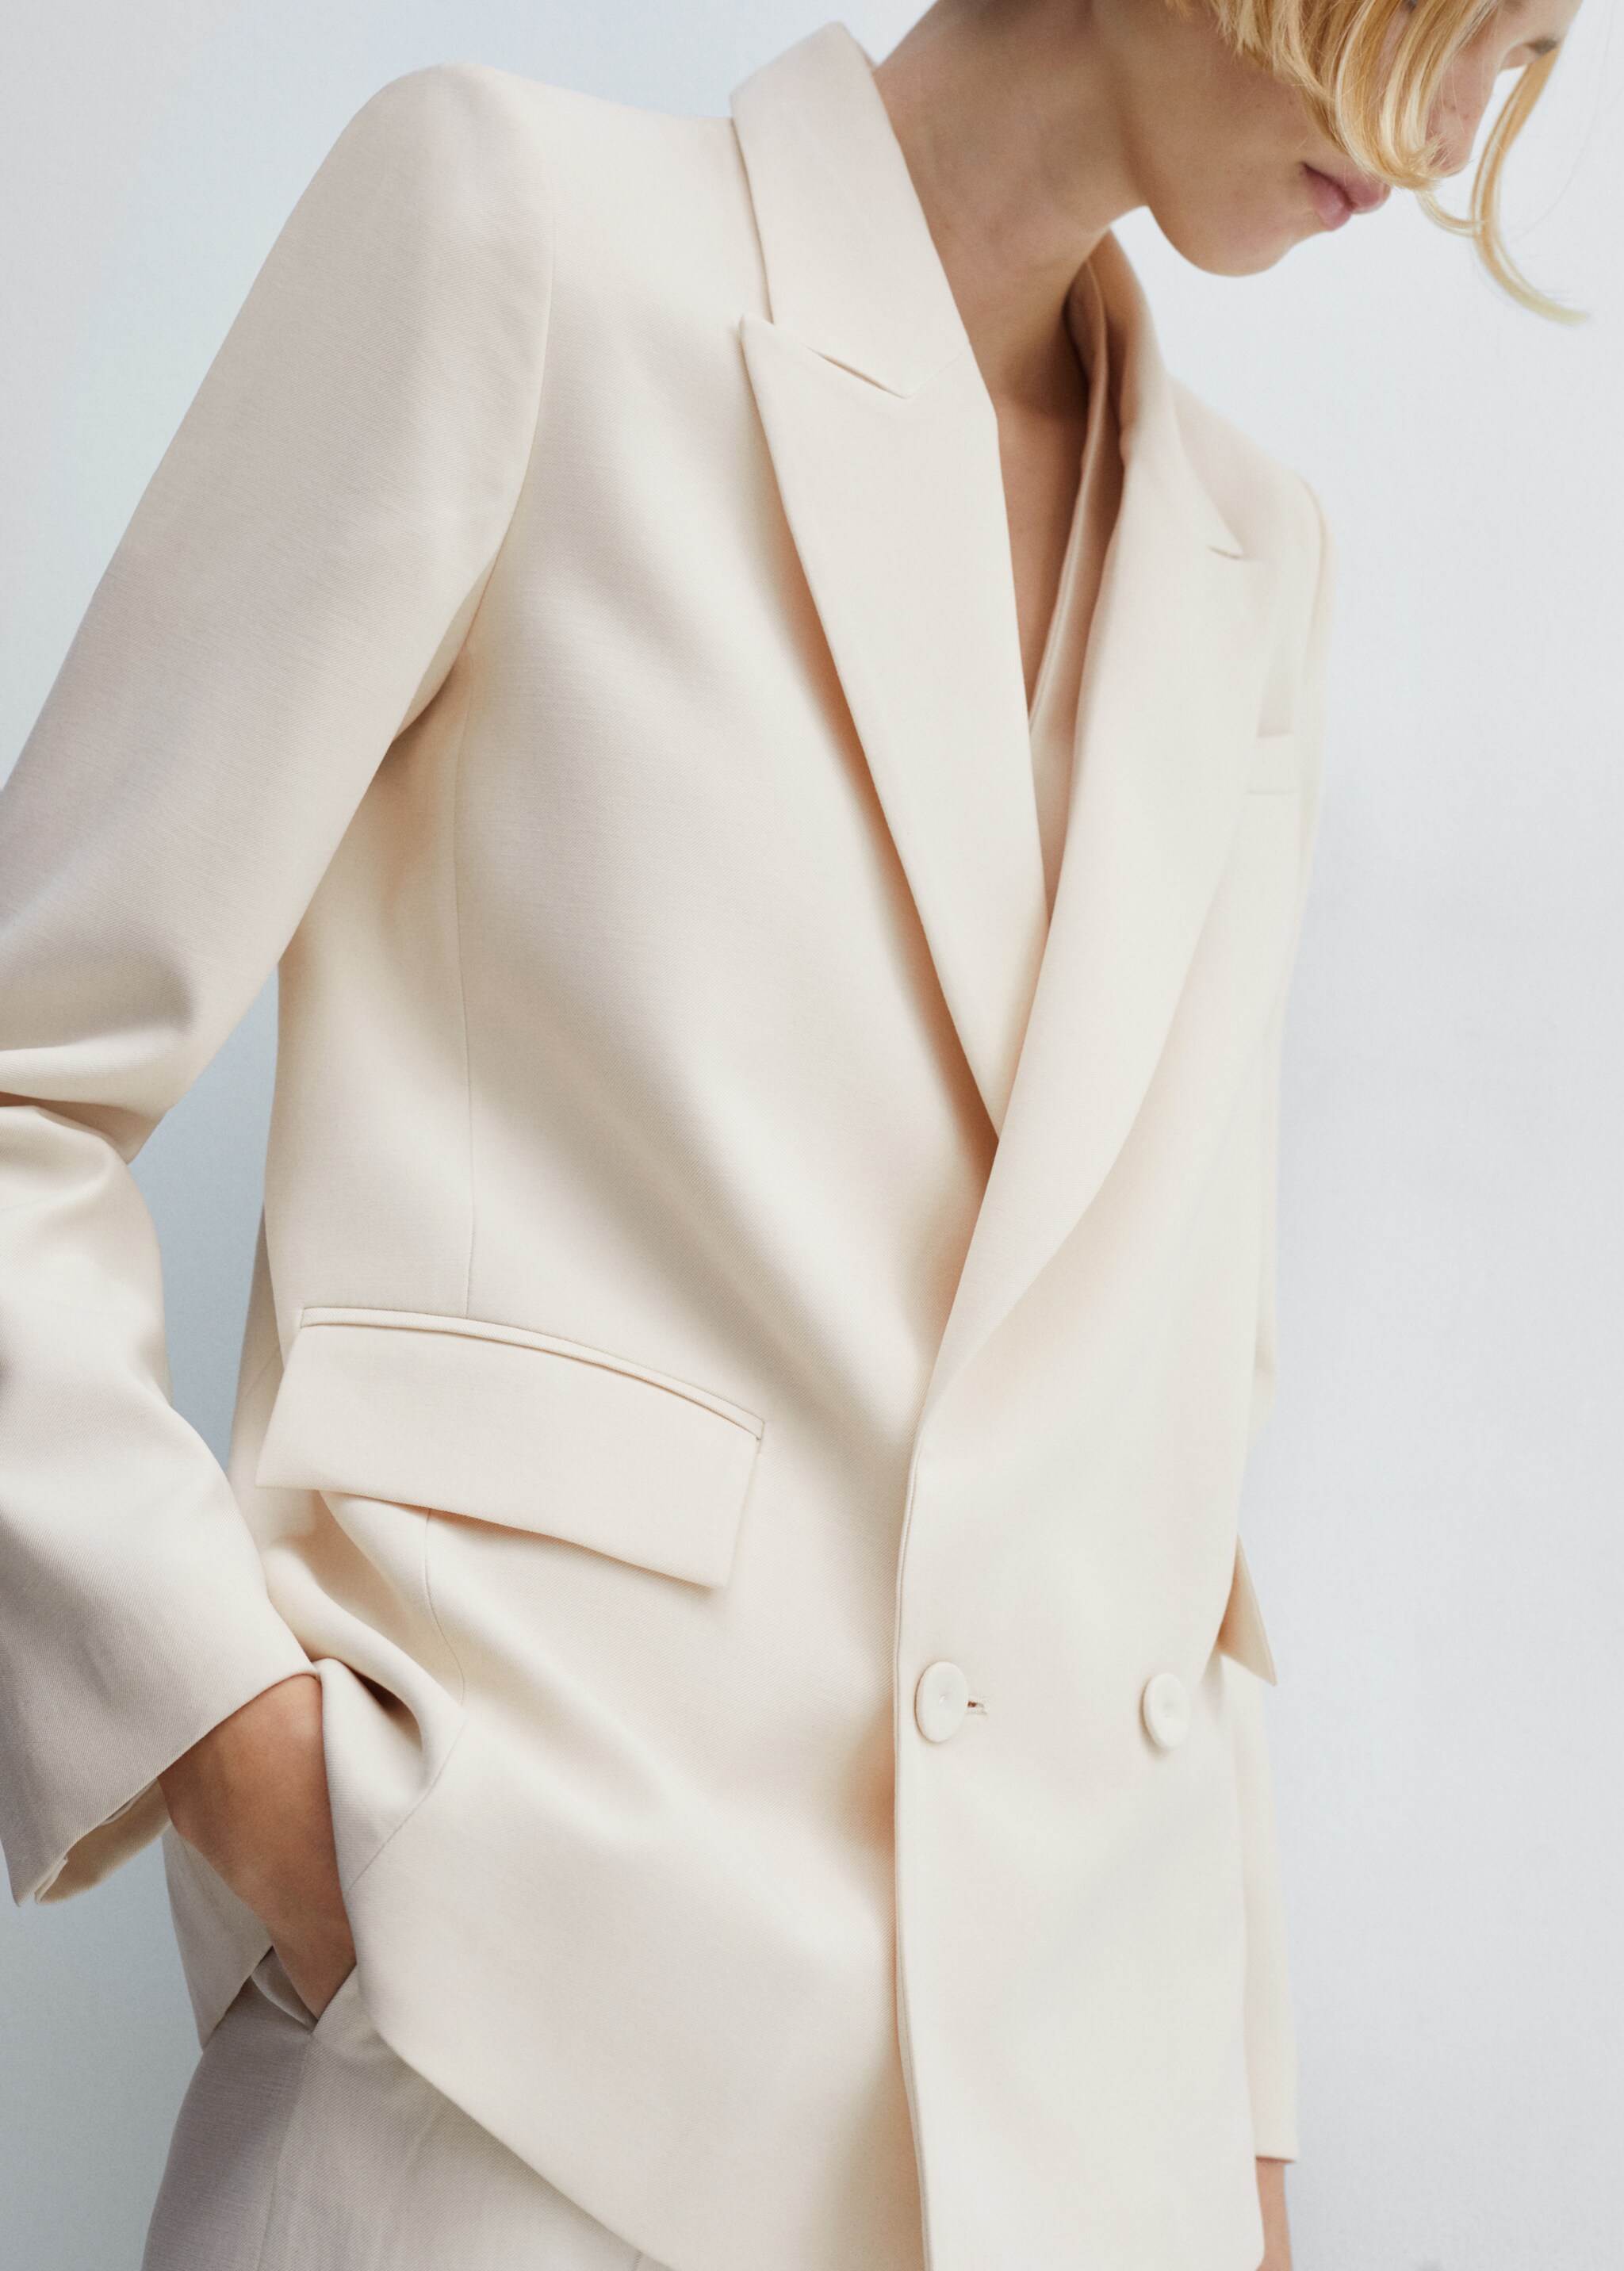 Double-breasted suit blazer - Details of the article 6